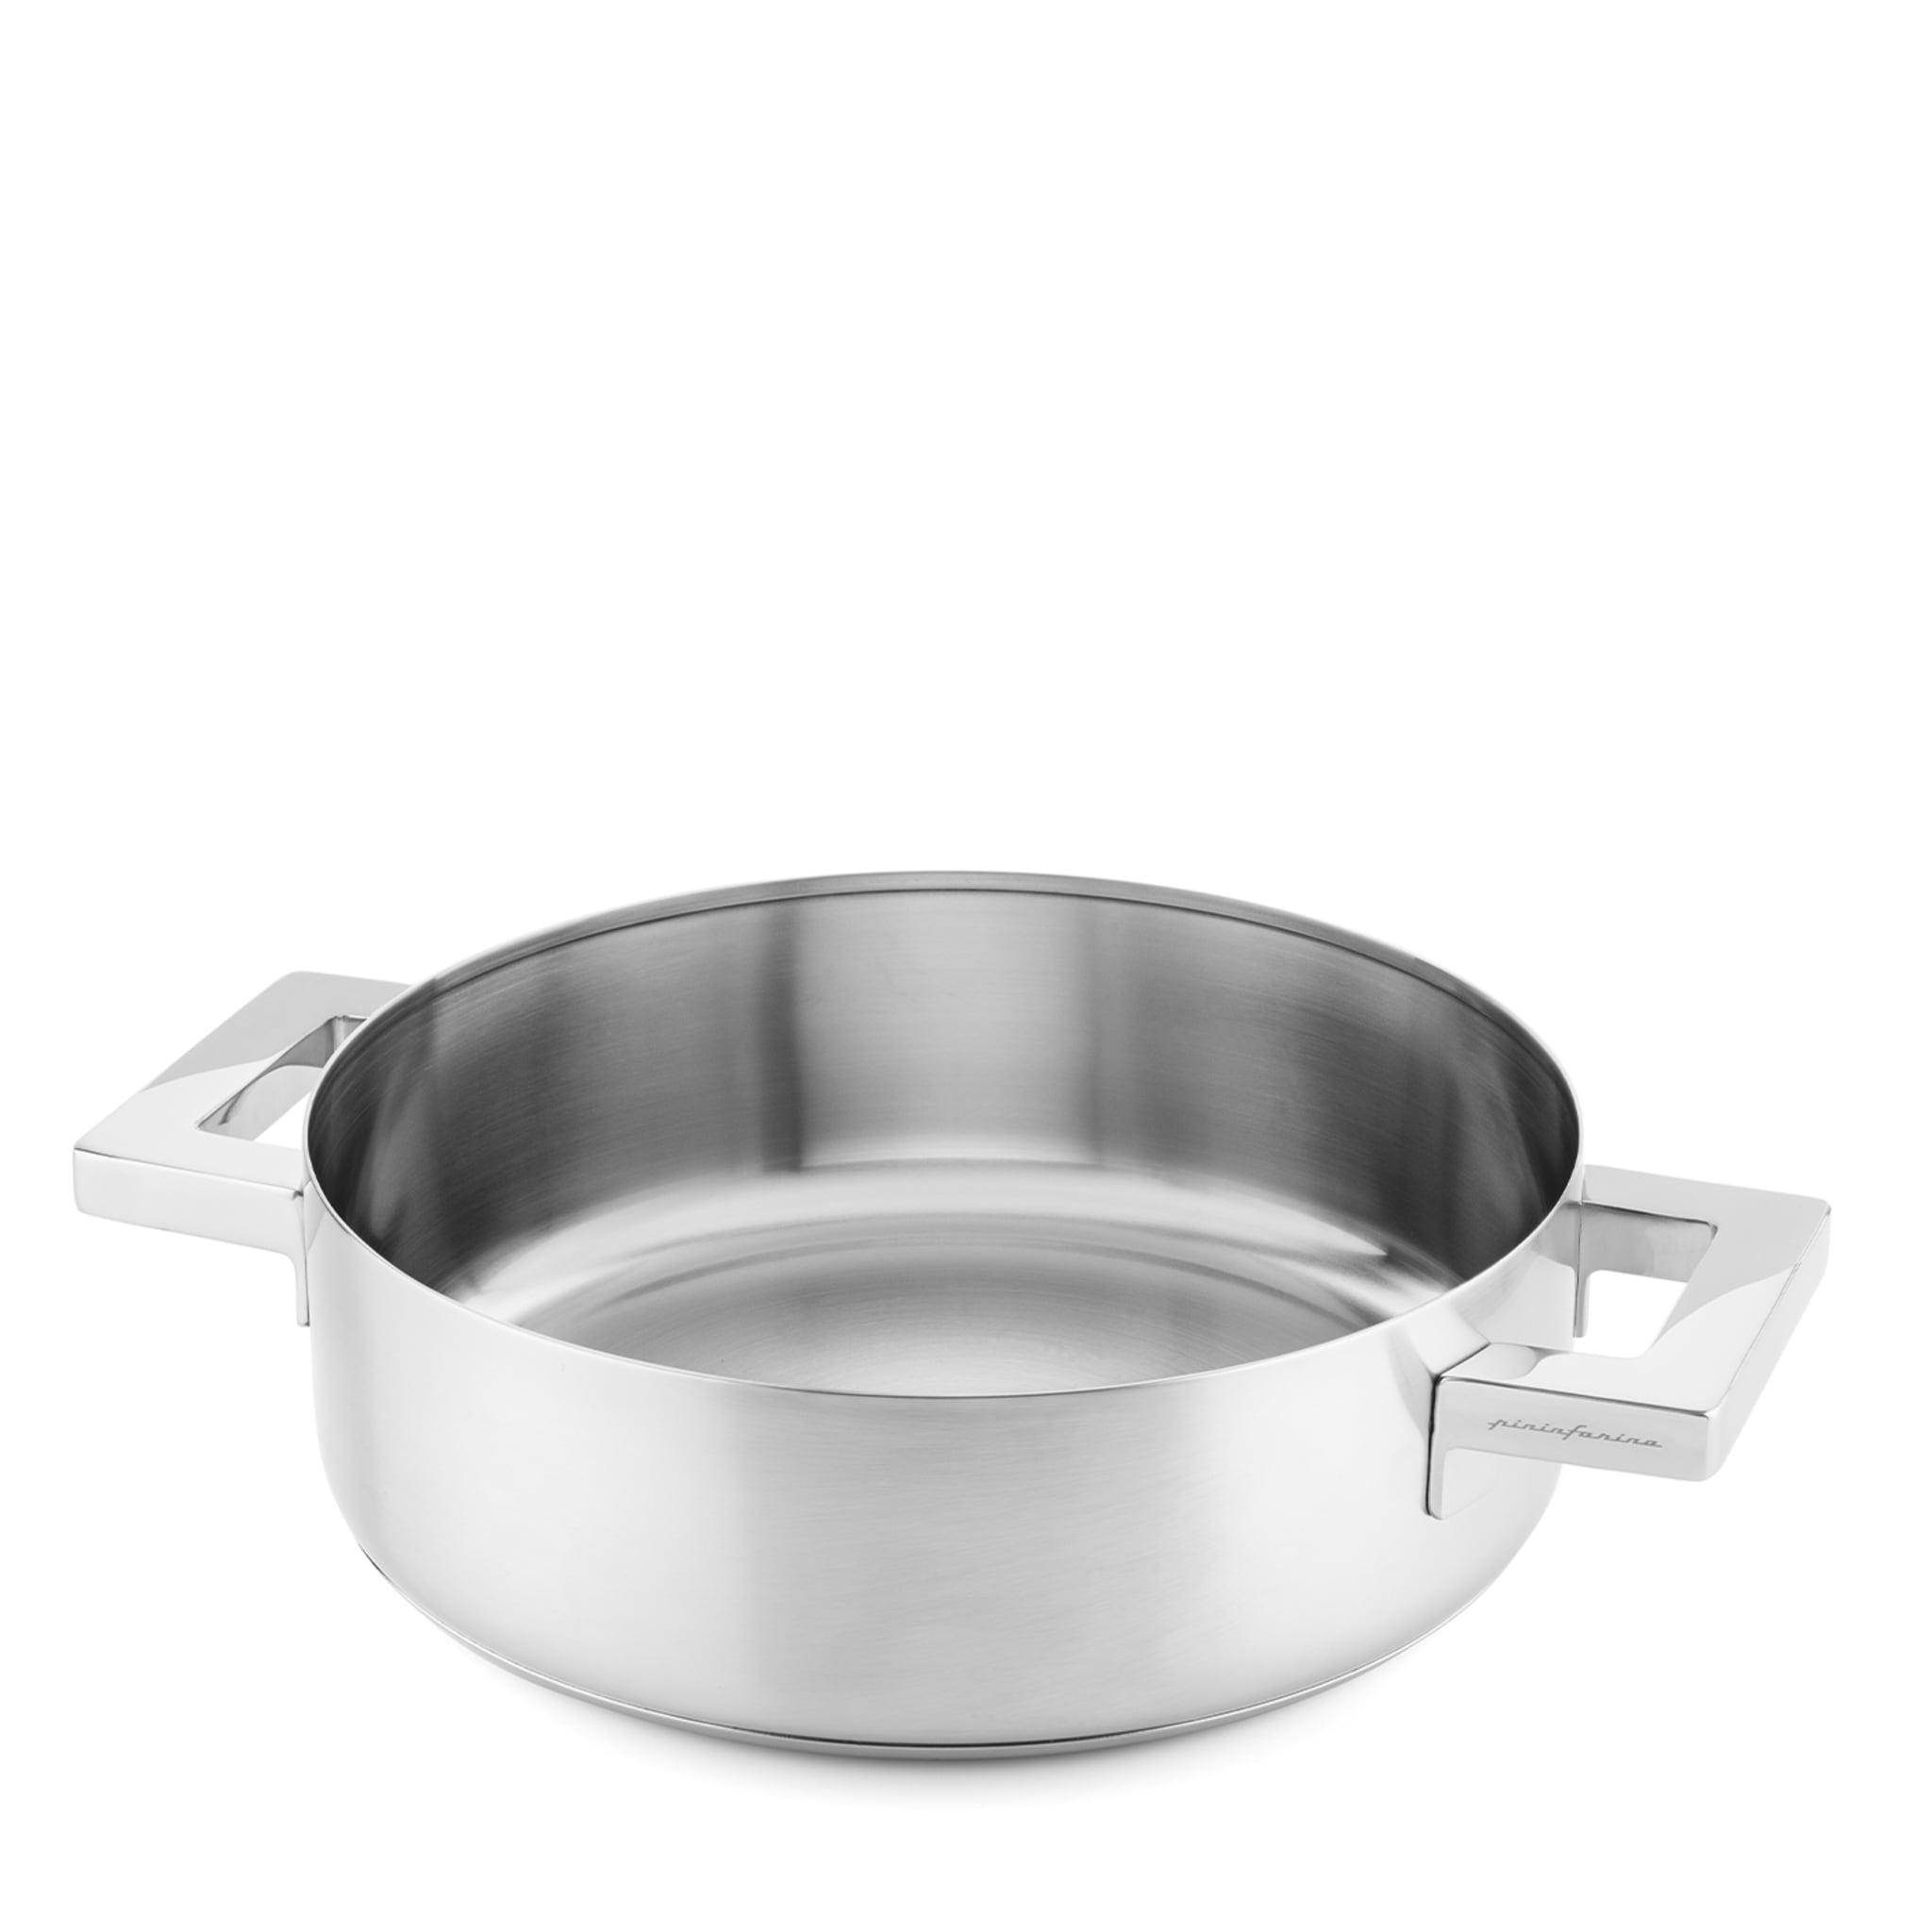 Stile 24cm Frying Pan with 2 Handles with lid - Alternative view 2